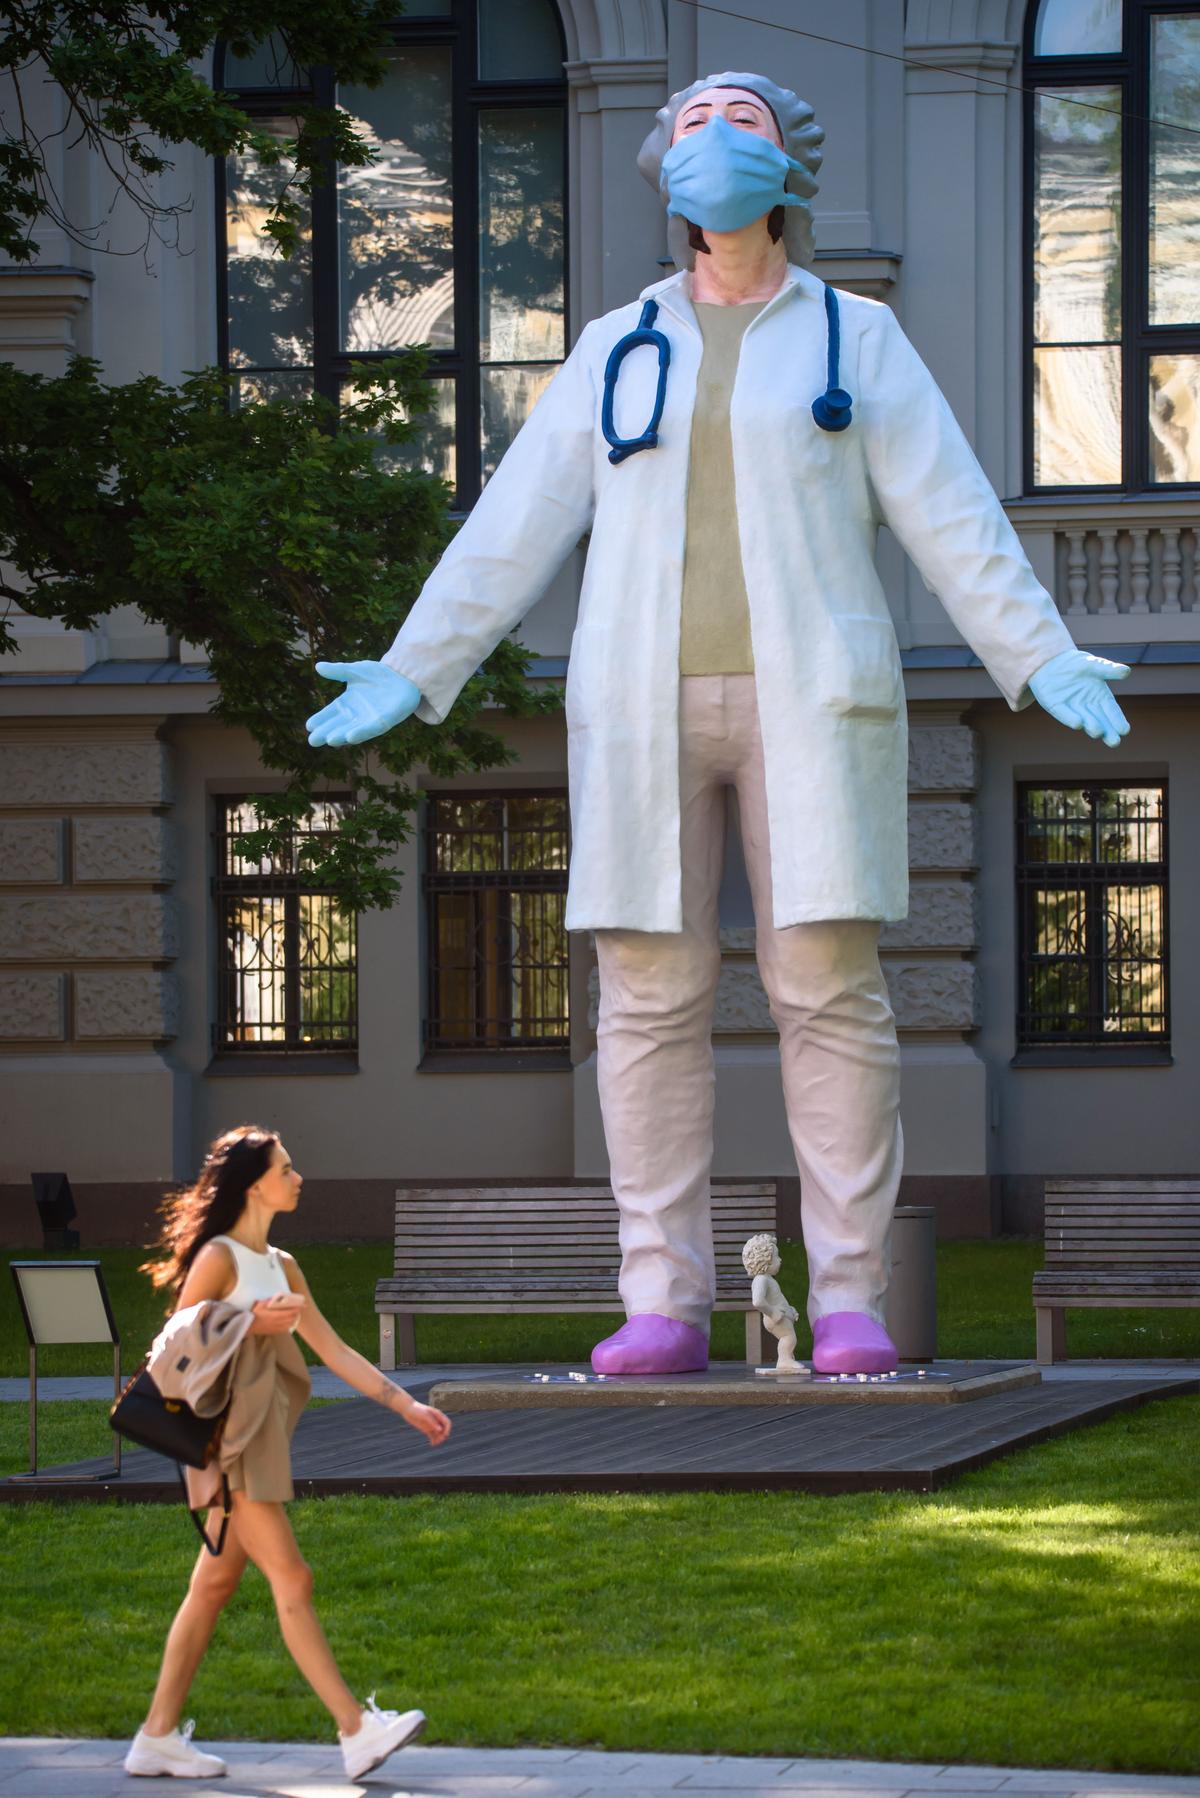 A 6-meter-high statue of a female doctor by Latvian artist Aigars Bikše called "Medics to the World," which stands in front of the National Museum of Arts as a sign of gratitude from the Latvian society to all health care workers for their selfless service during the CCP virus pandemic, on June 17, 2020, in Riga, Latvia. (GINTS IVUSKANS/AFP via Getty Images)